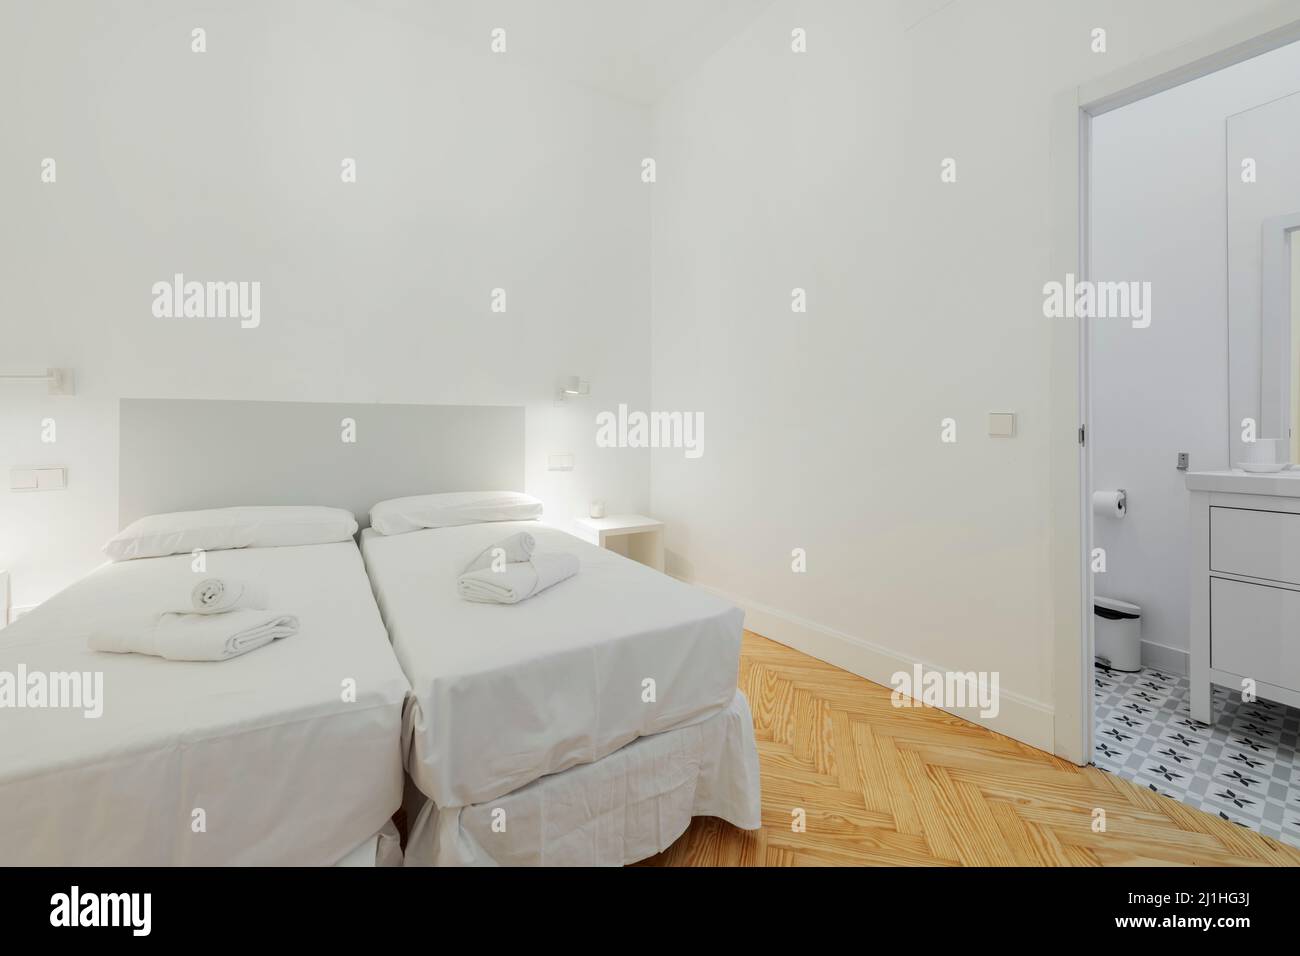 Bedroom with double beds and white sheets, bath towels on the beds and white bedside tables and access to an en-suite bathroom with white cabinets Stock Photo